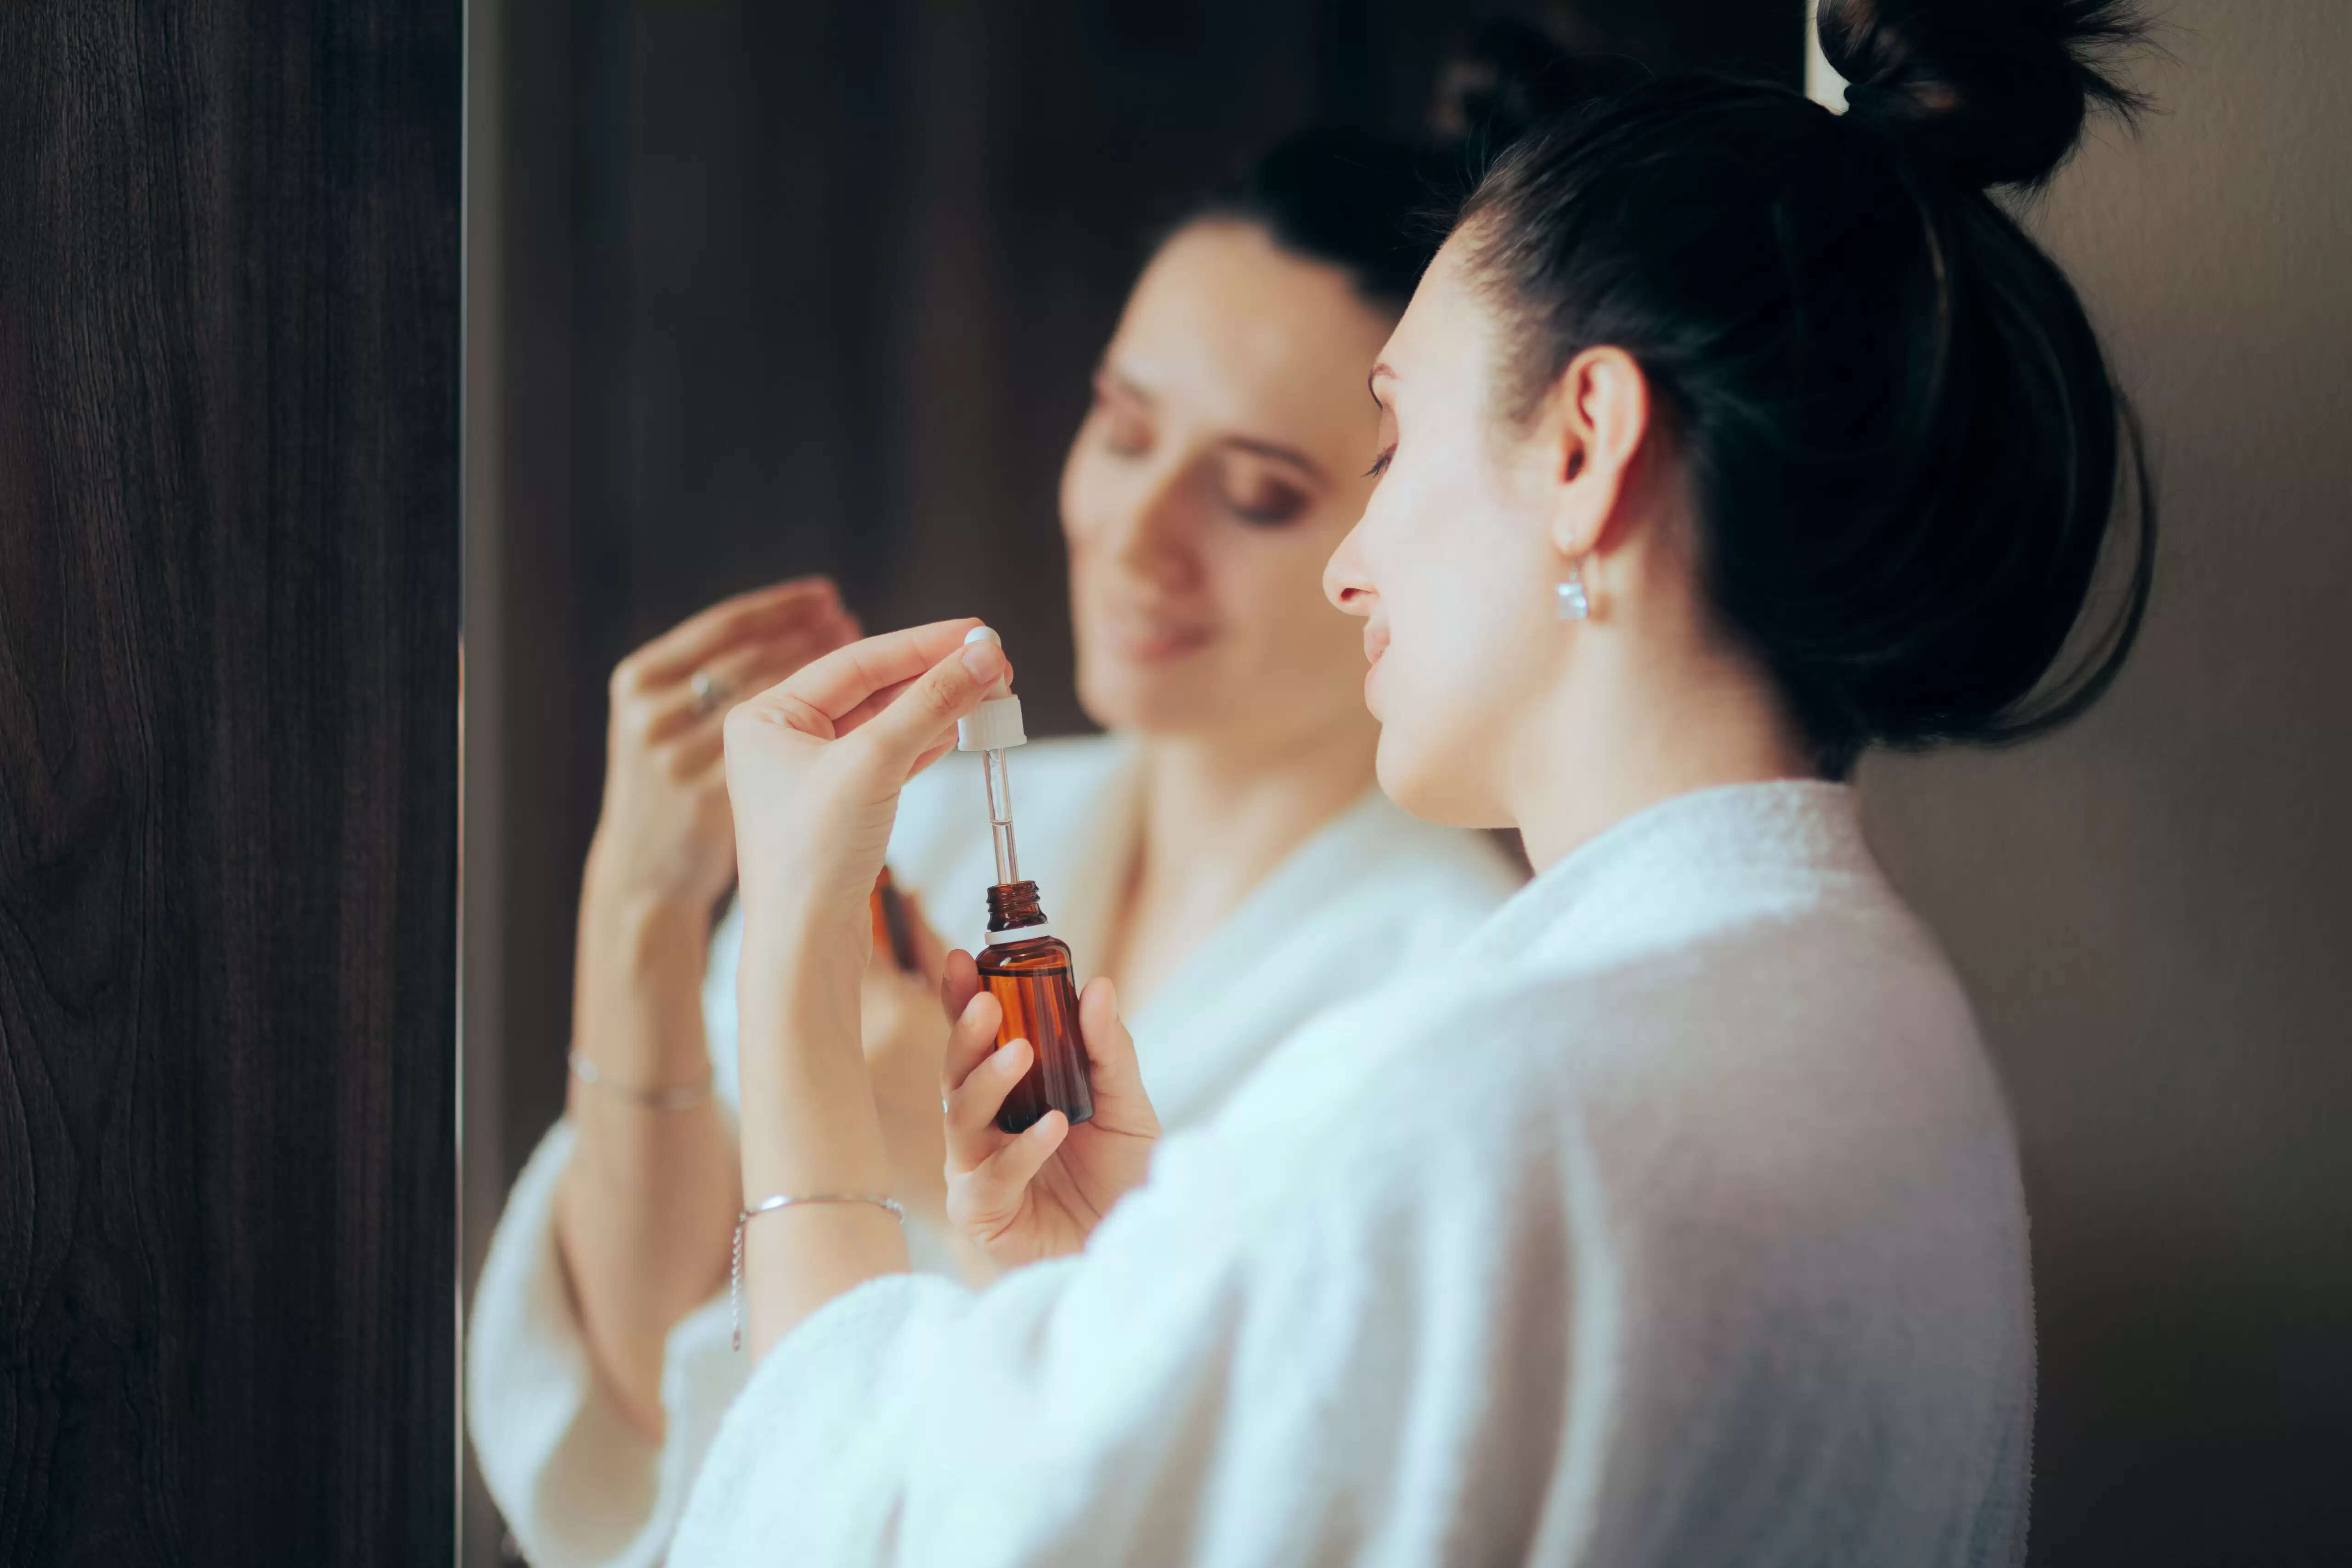 5 Easy Steps to a Nighttime Skincare Routine